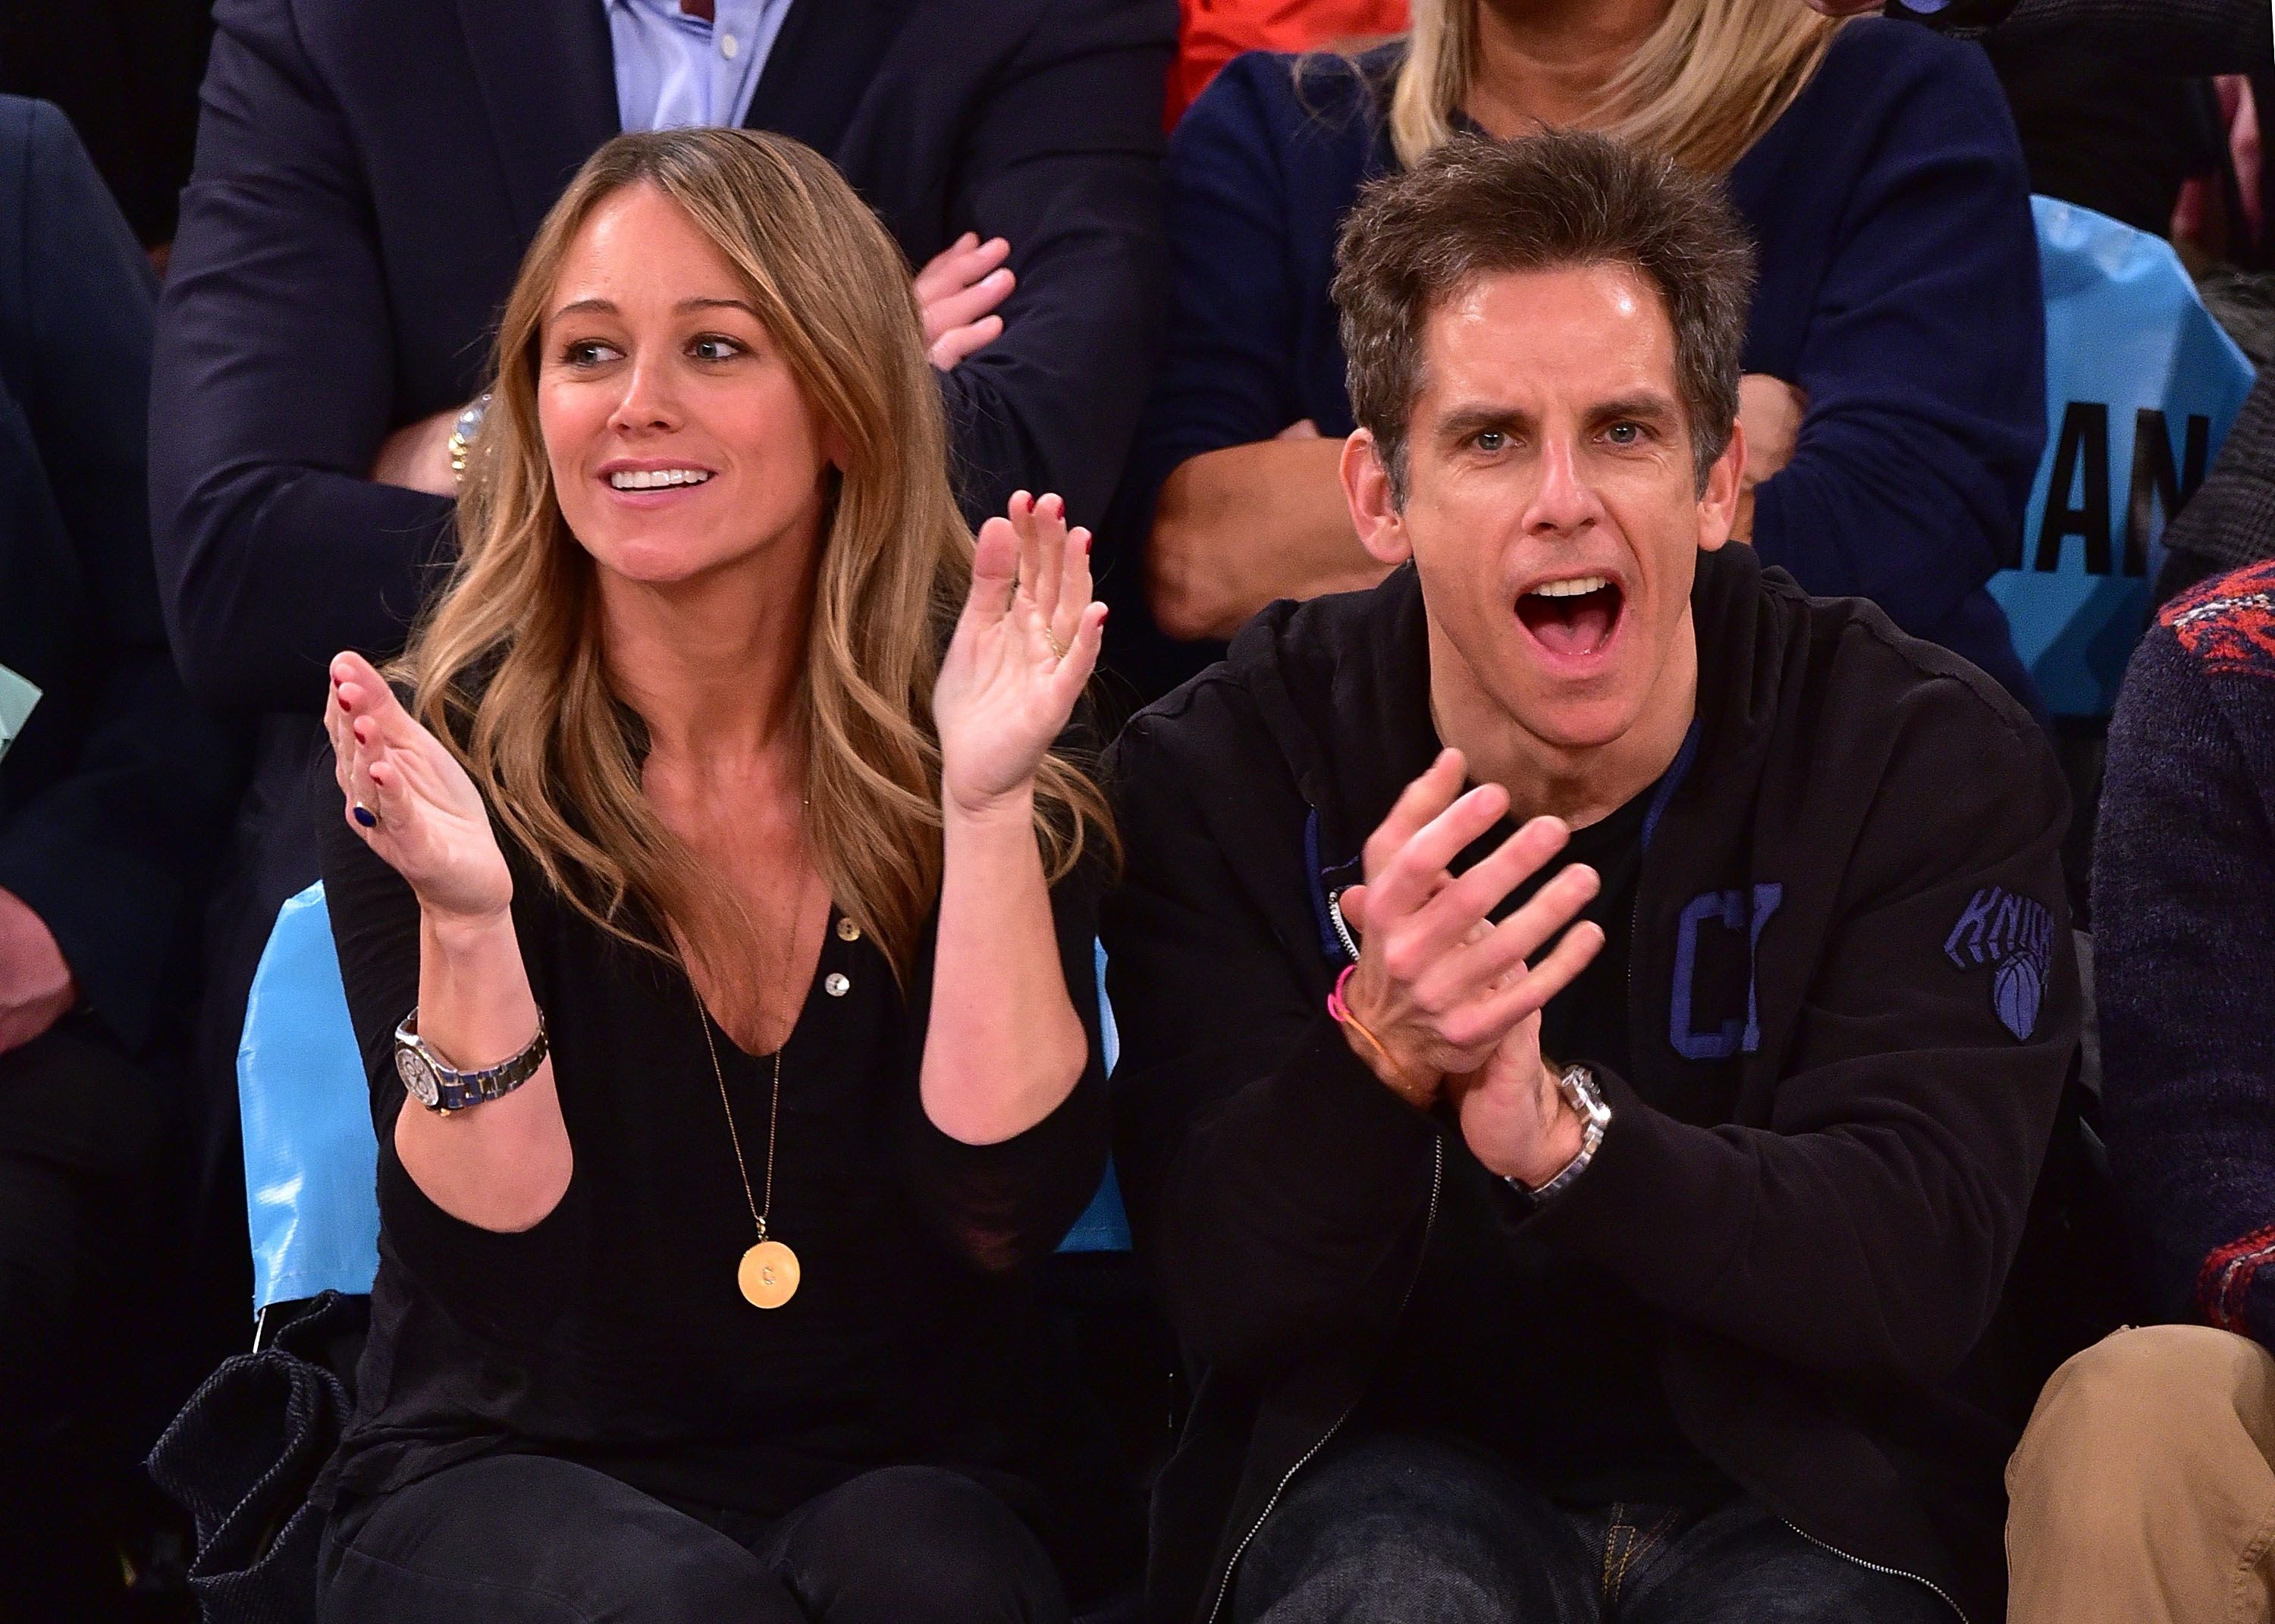 The couple cheering at a sporting event